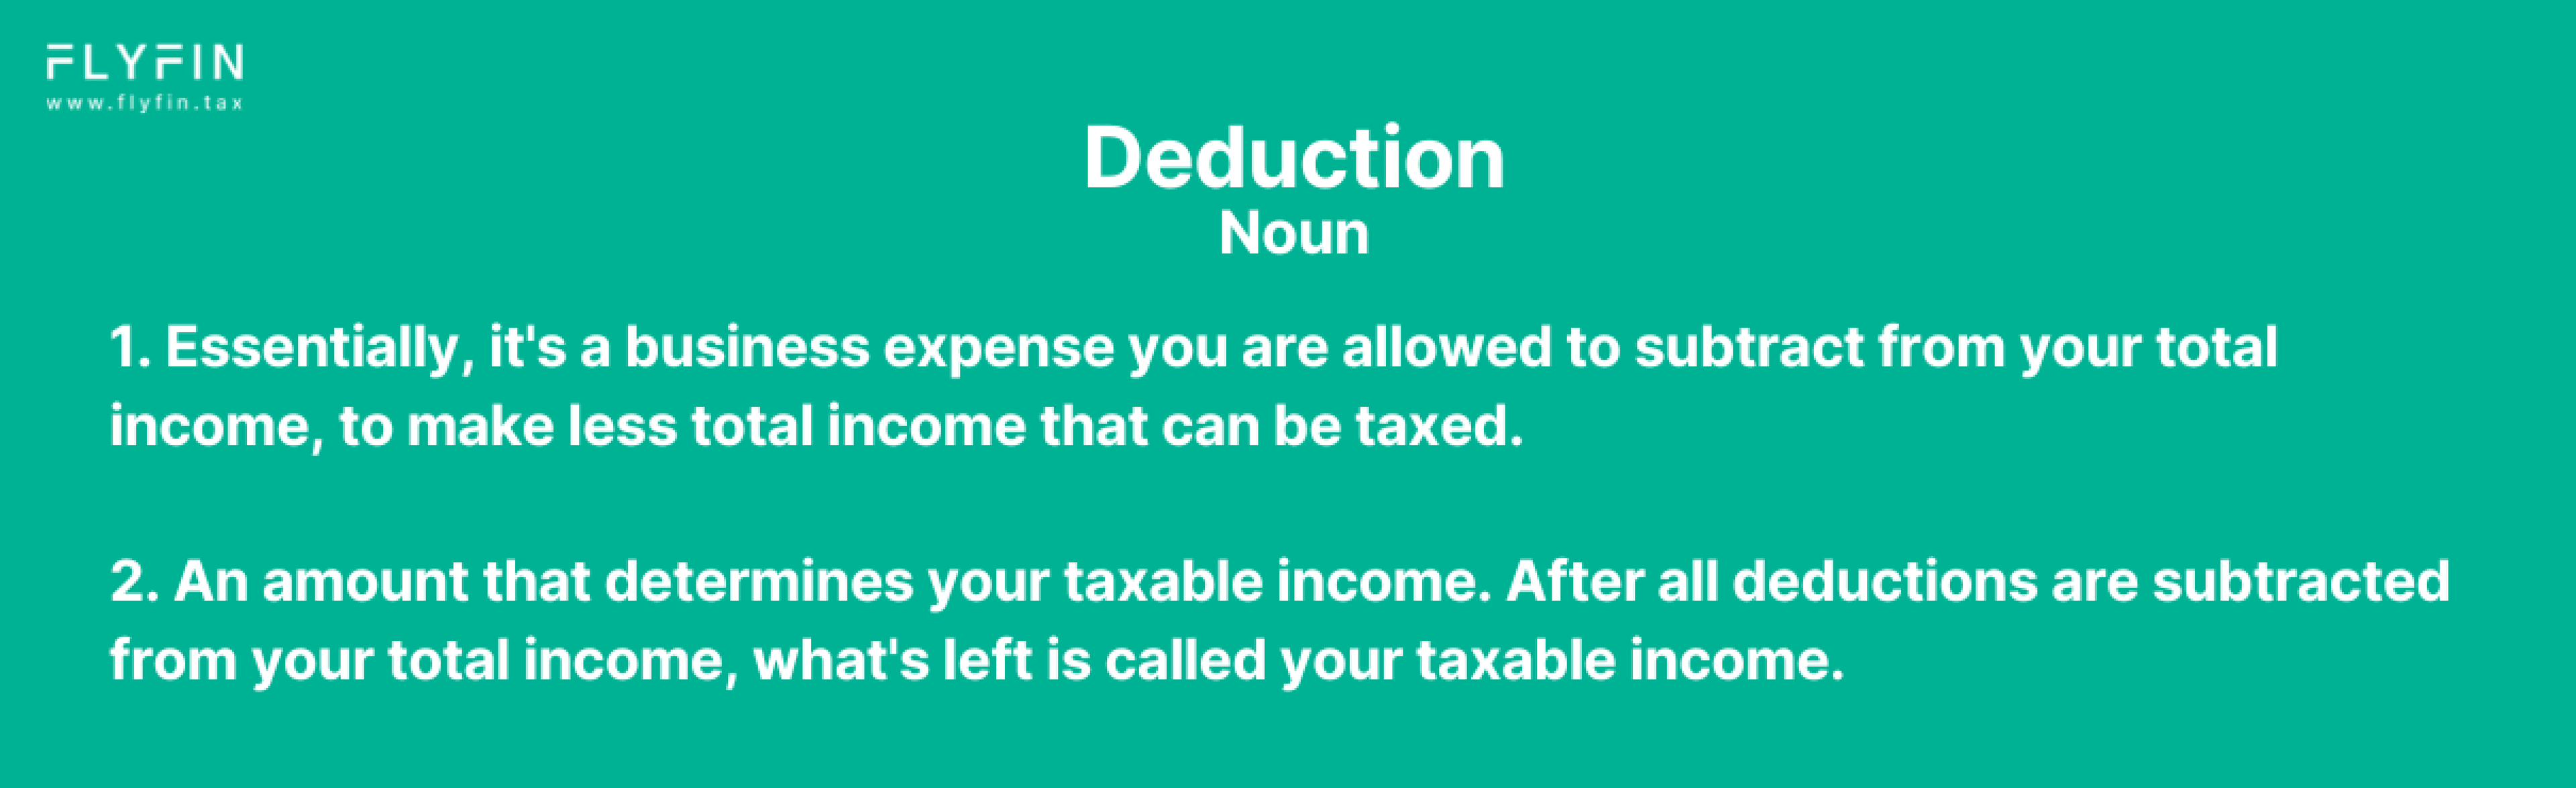 What exactly is a deduction and how does it relate to taxes?